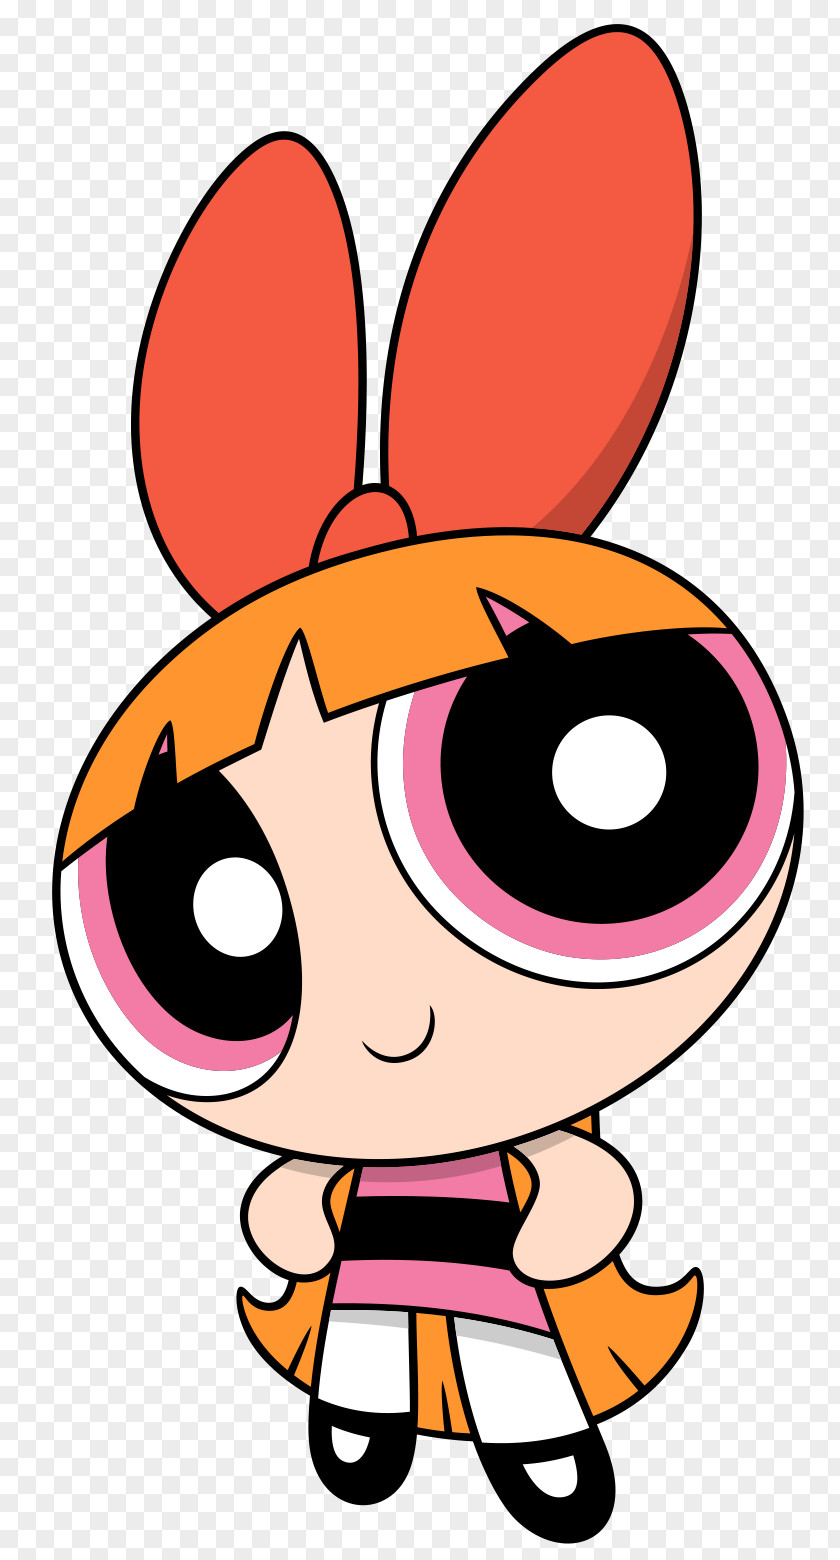 Blossom Clipart Mojo Jojo Blossom, Bubbles, And Buttercup Cartoon Network Television Show PNG